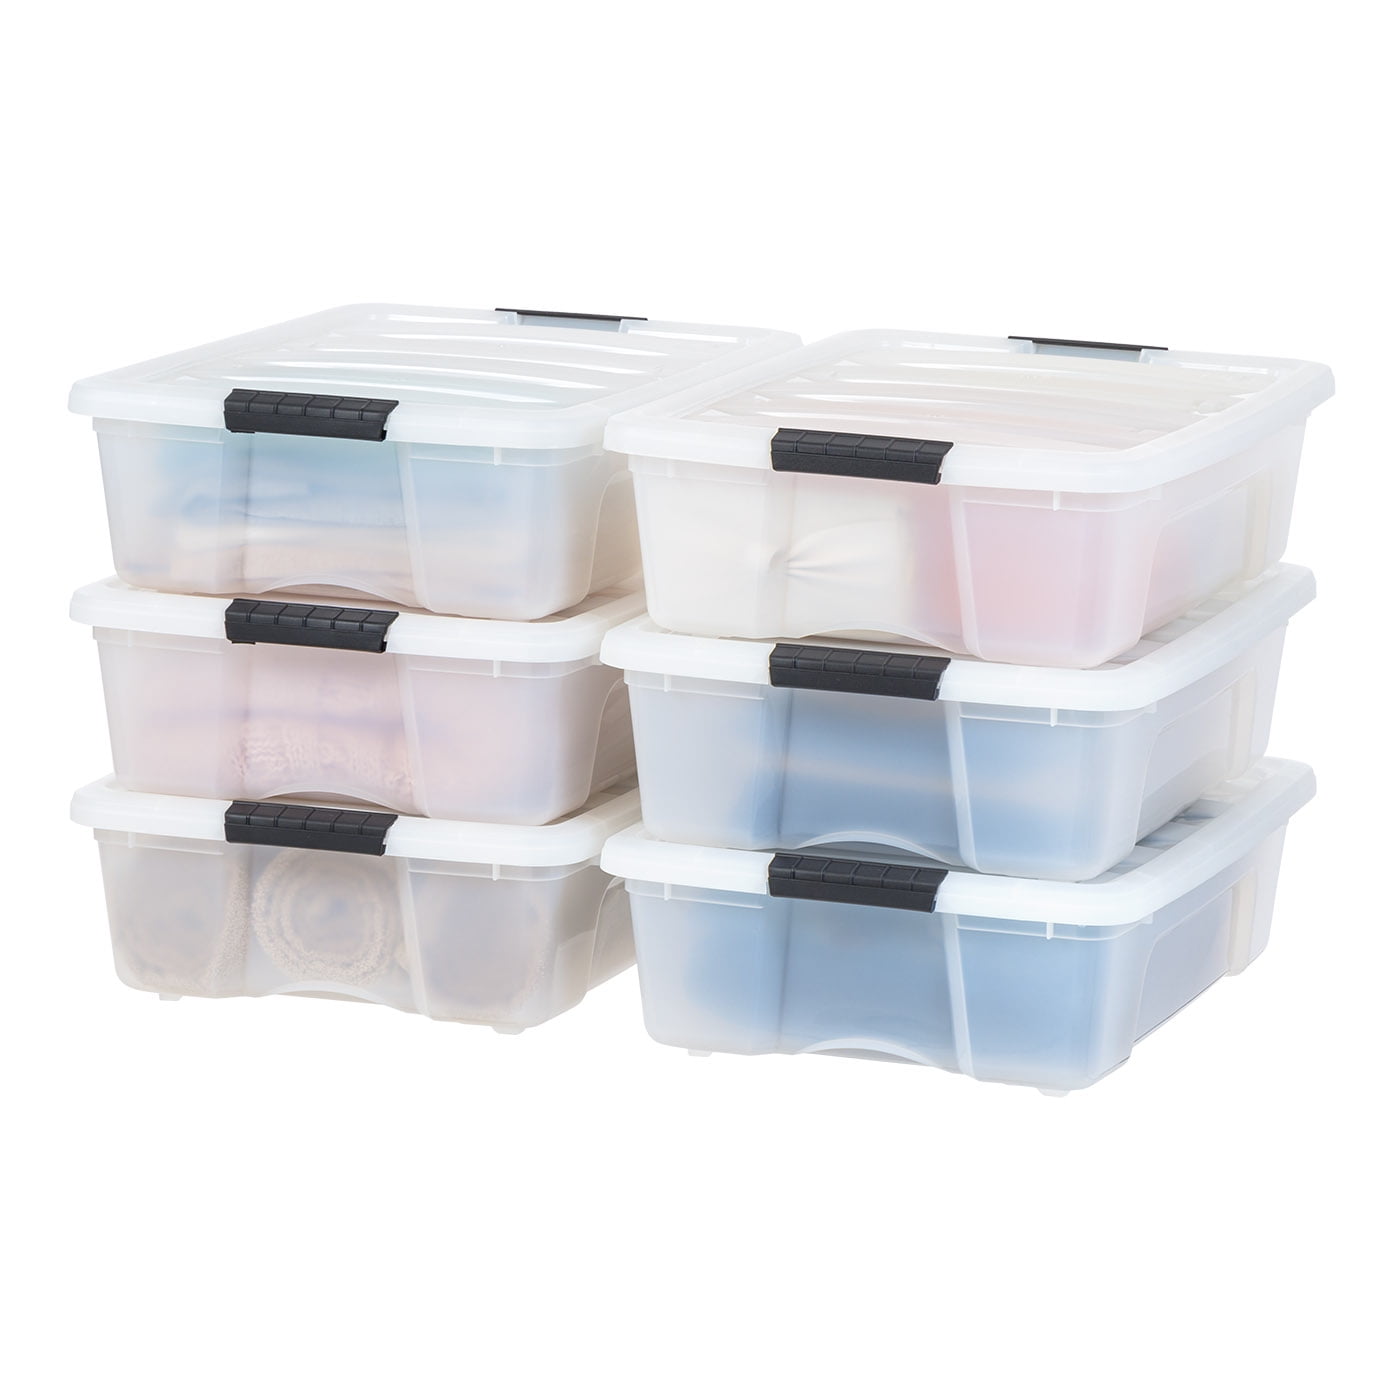 Iris USA 4 Pack 53QT Plastic Storage Bin with Lid and Secure Latching Buckles, Pearl